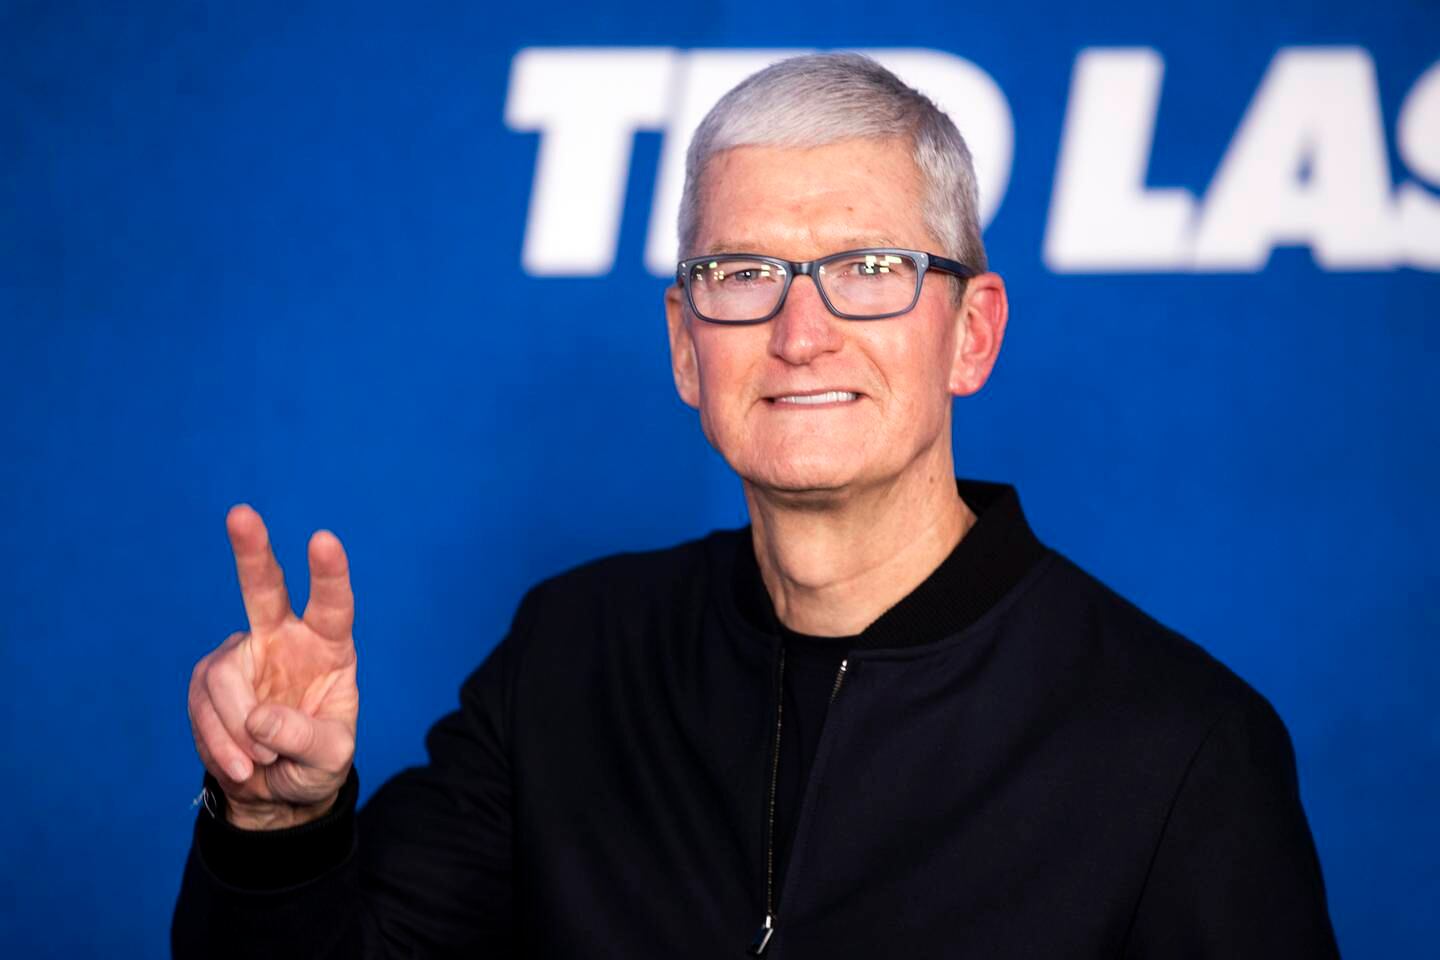 Apple chief executive Tim Cook said the company saw a strong double-digit increases in both upgraders and switchers during the quarter. EPA